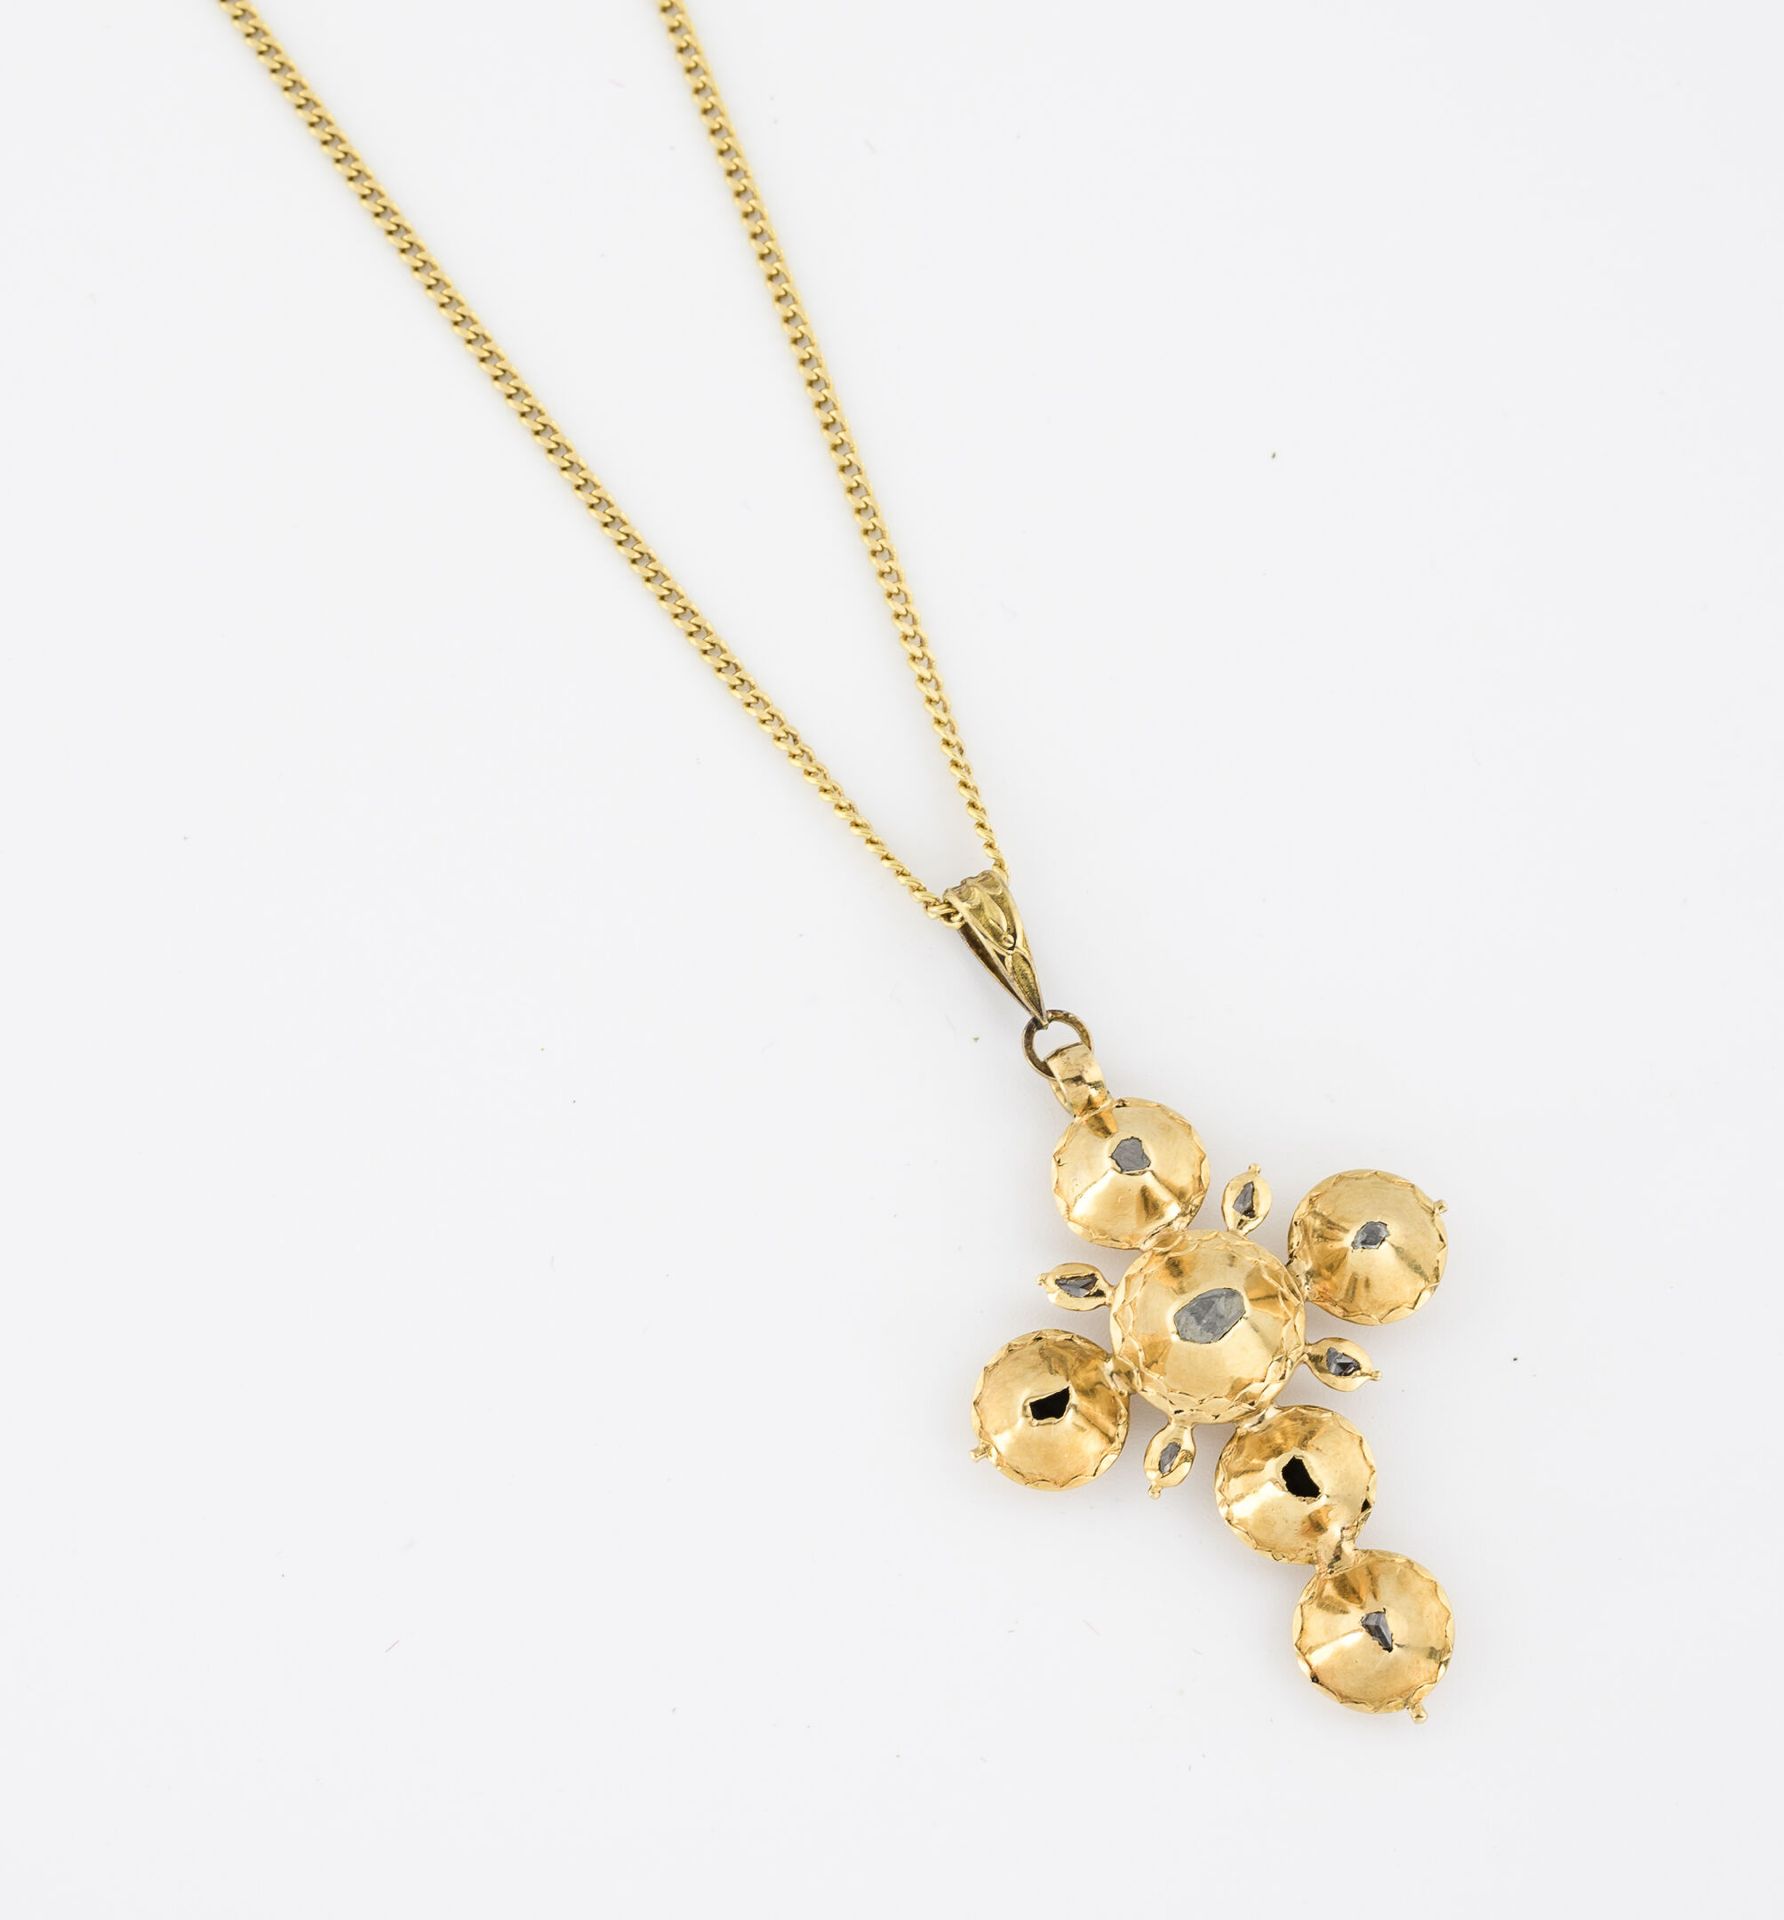 Null Yellow gold (750) necklace with curb chain. 

Spring ring clasp.

Weight : &hellip;